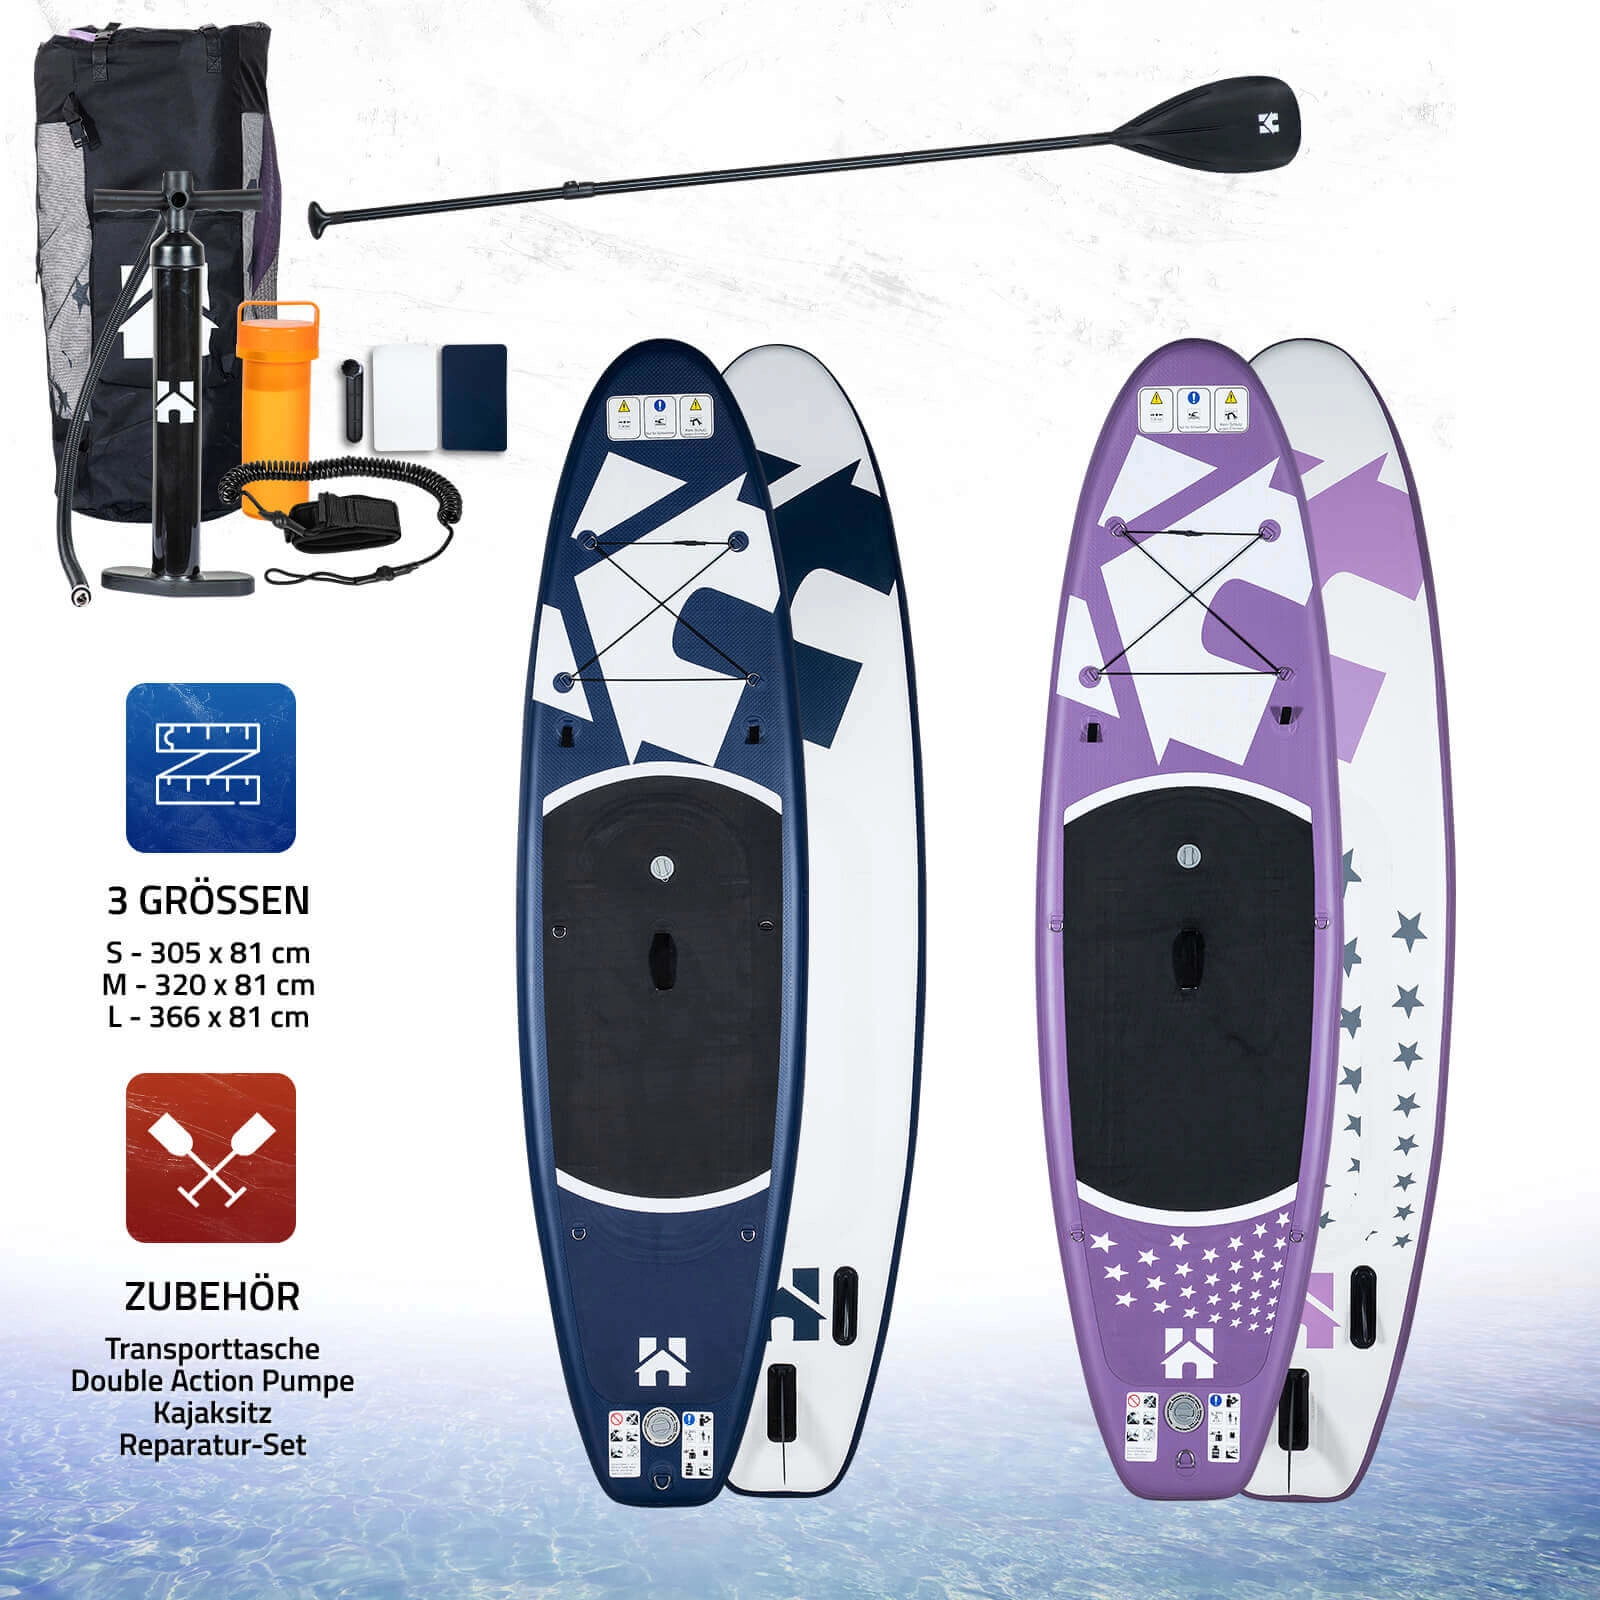 Home Deluxe Stand Up Paddle Board Moana S 305 cm x 81 cm Blau kaufen bei OBI